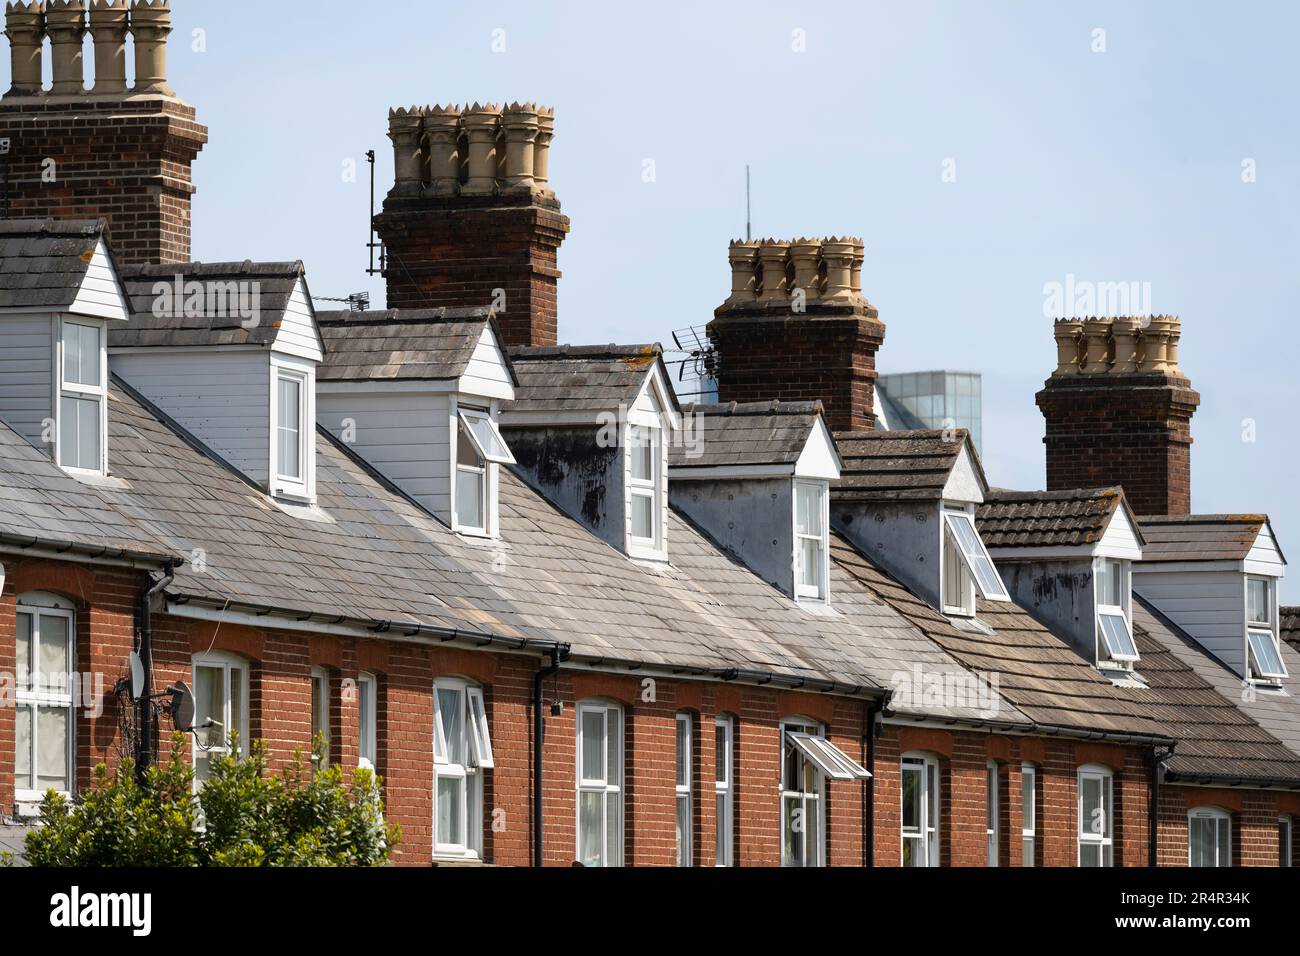 Victorian terraced housing on Worting Road, Basingstoke, UK. Concept: England housing market, mortgage deals, property prices, buy to let Stock Photo